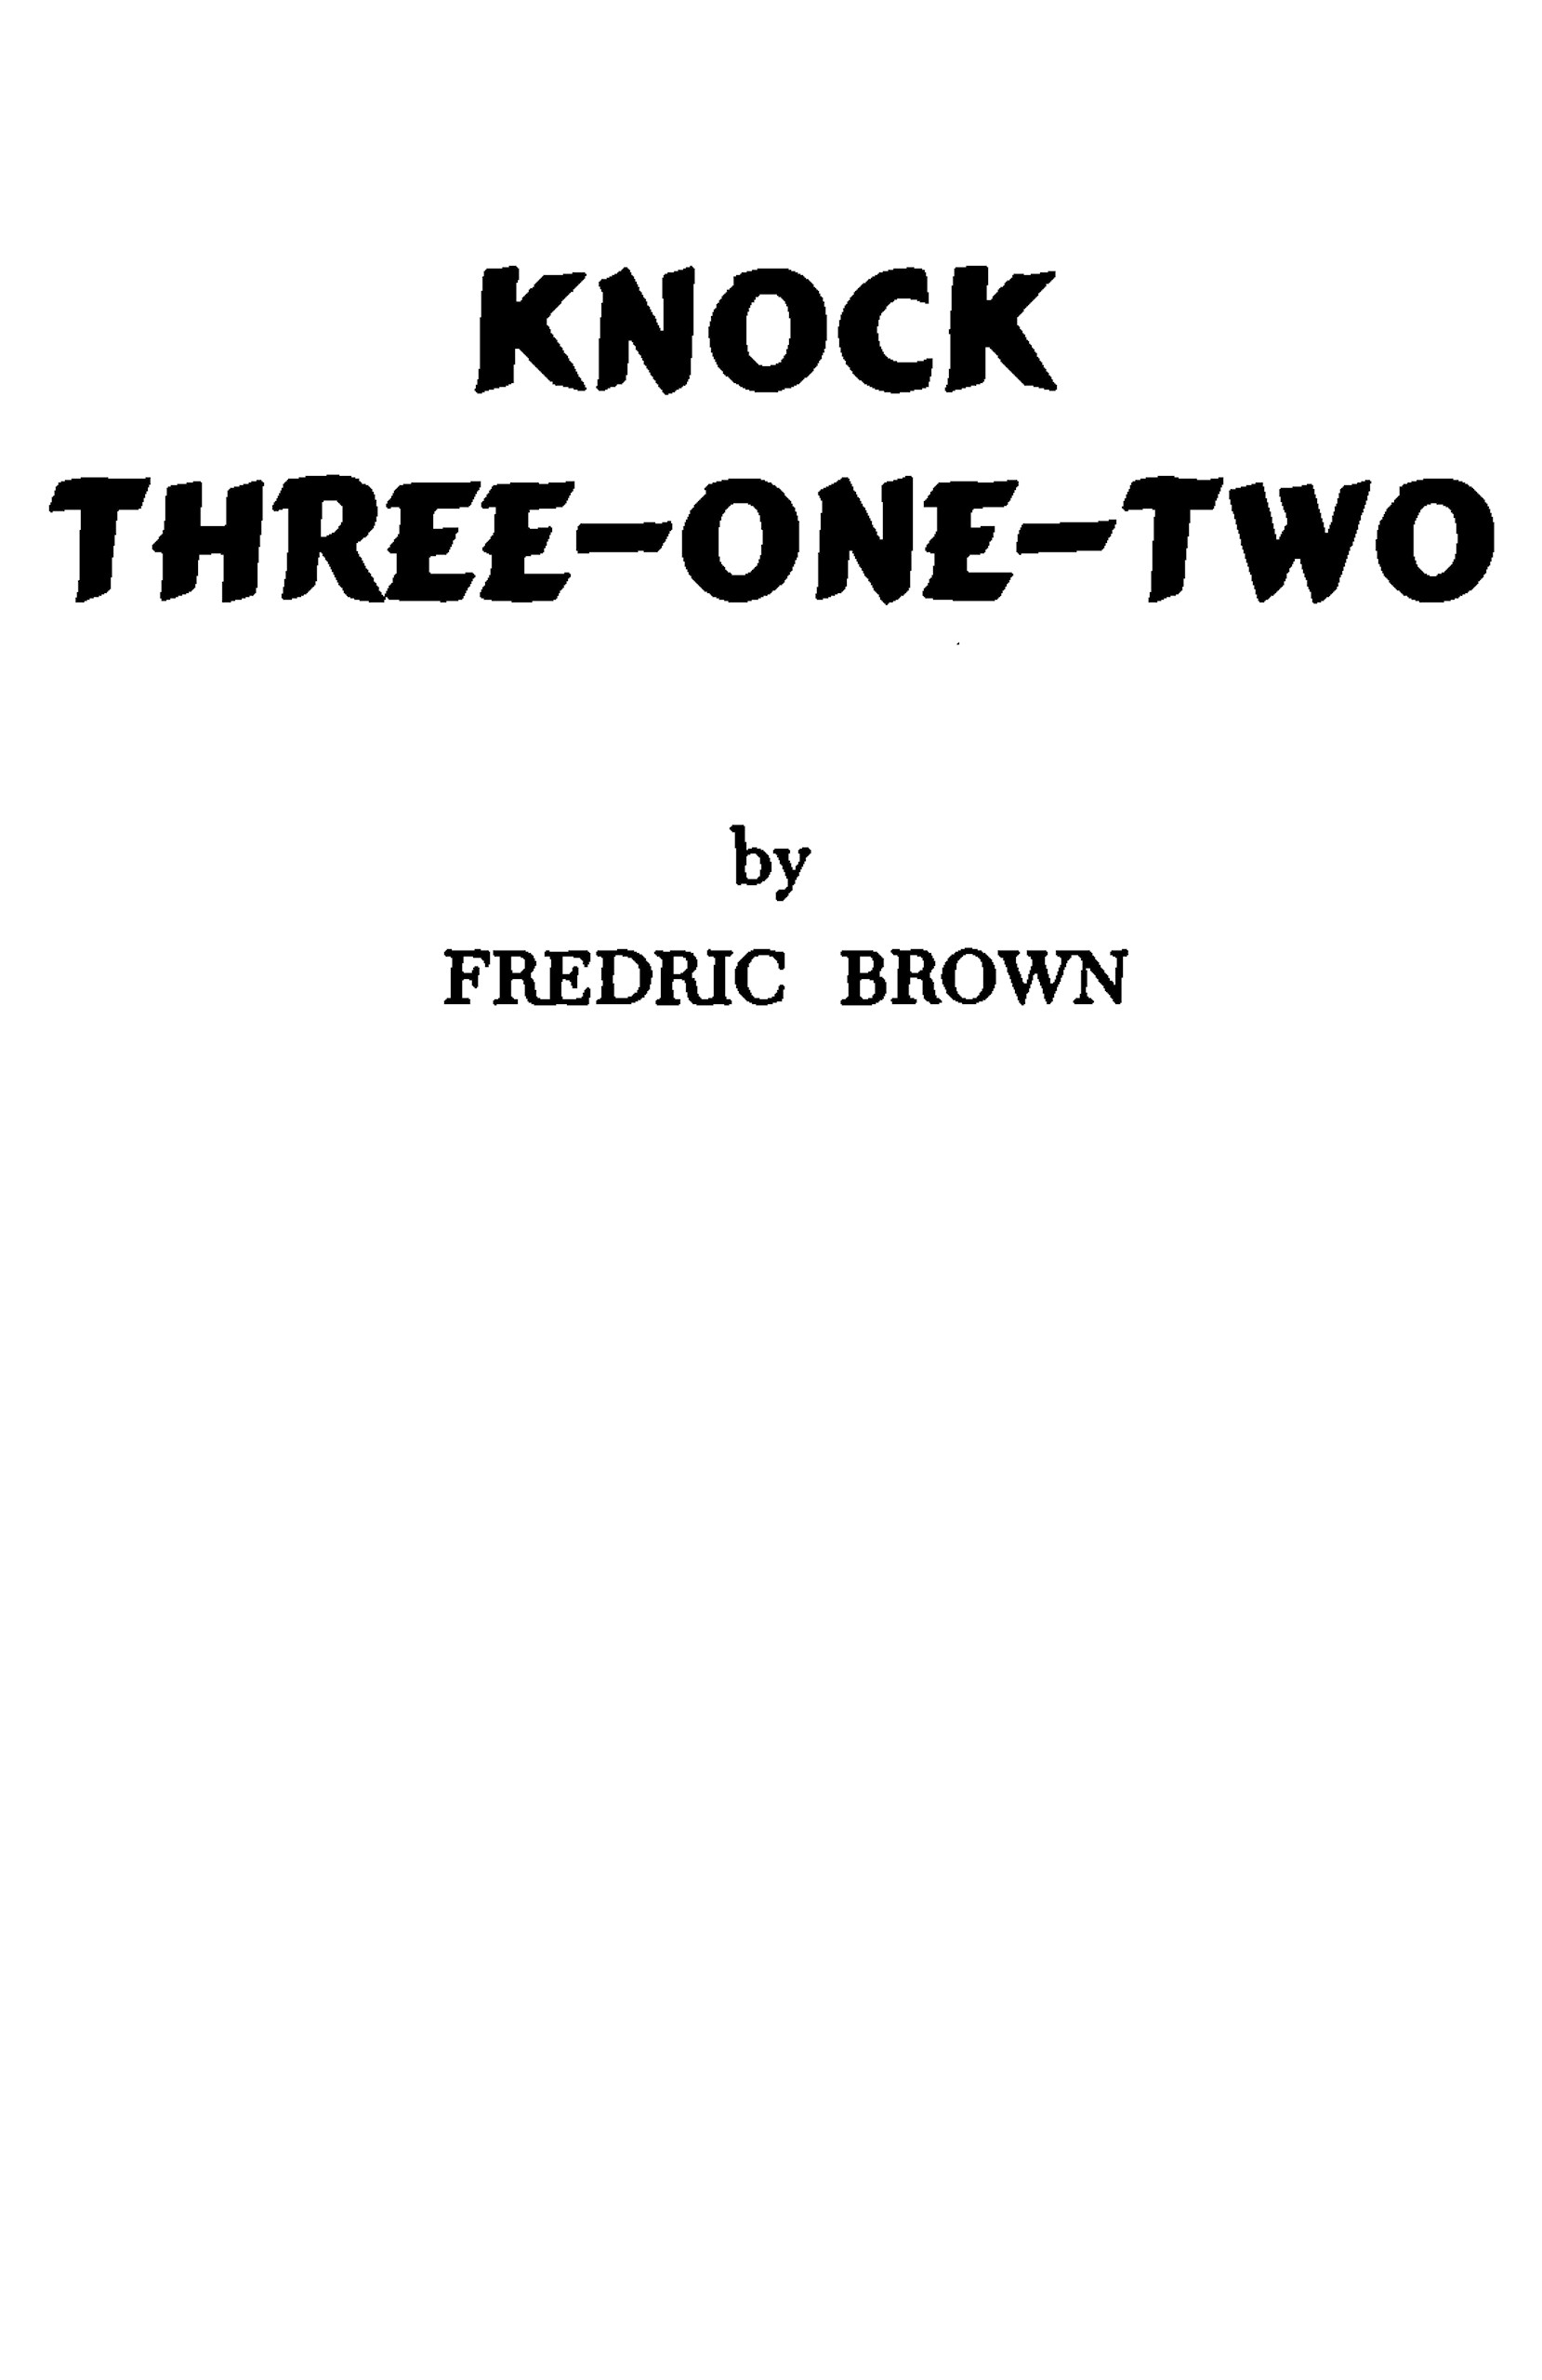 Knock three-one-two